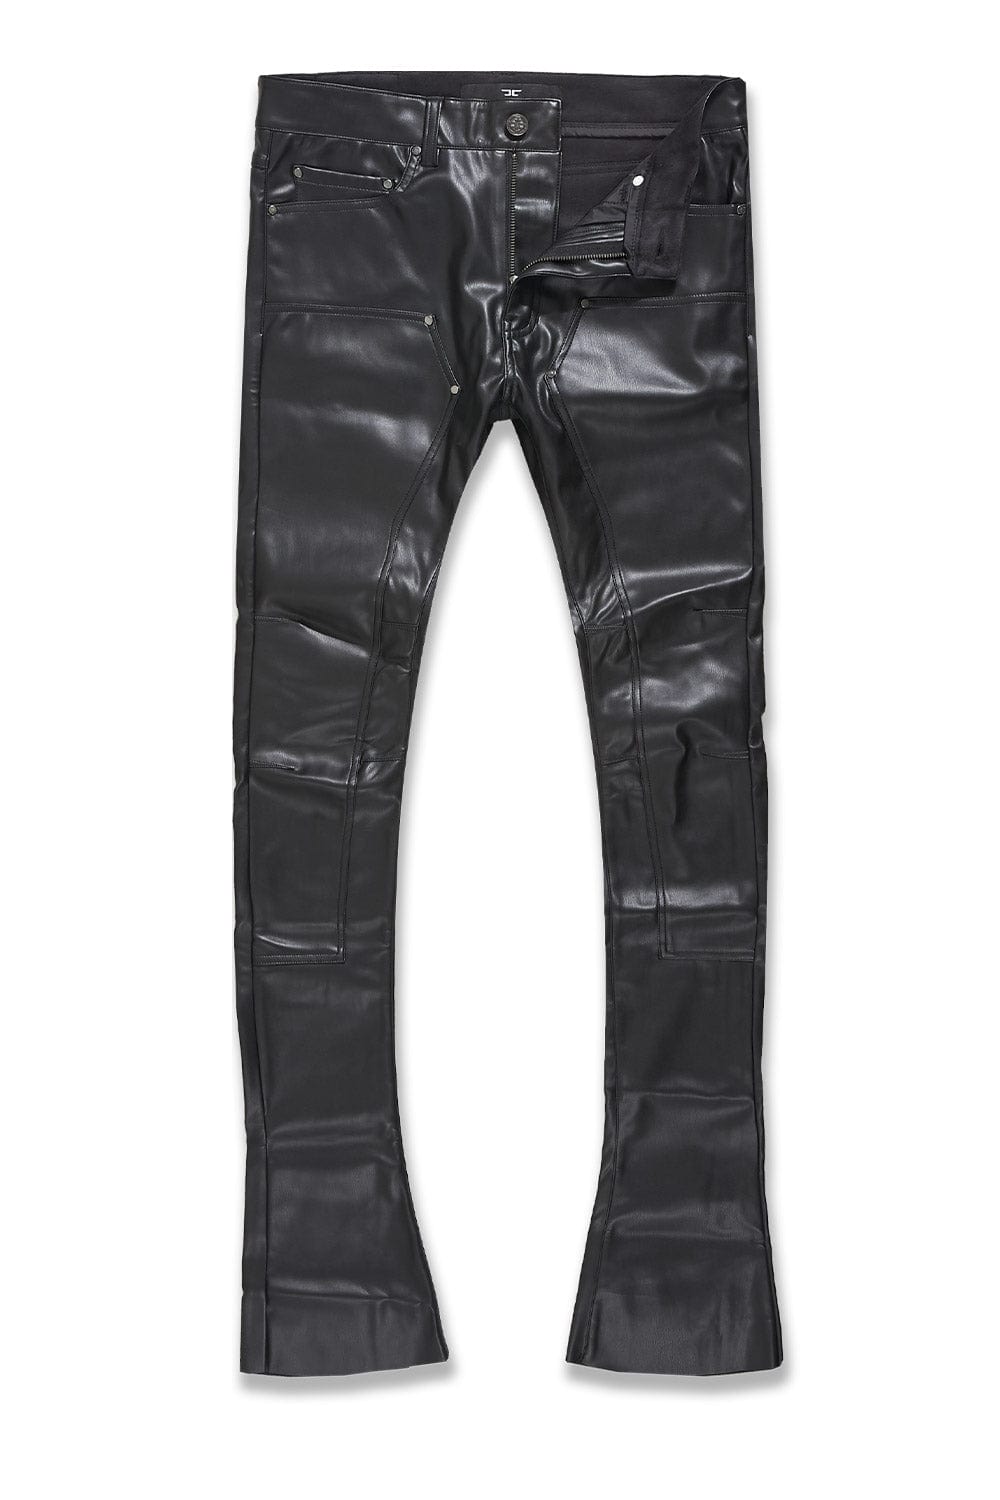 Ross Stacked - Monte Carlo Pants (Black)